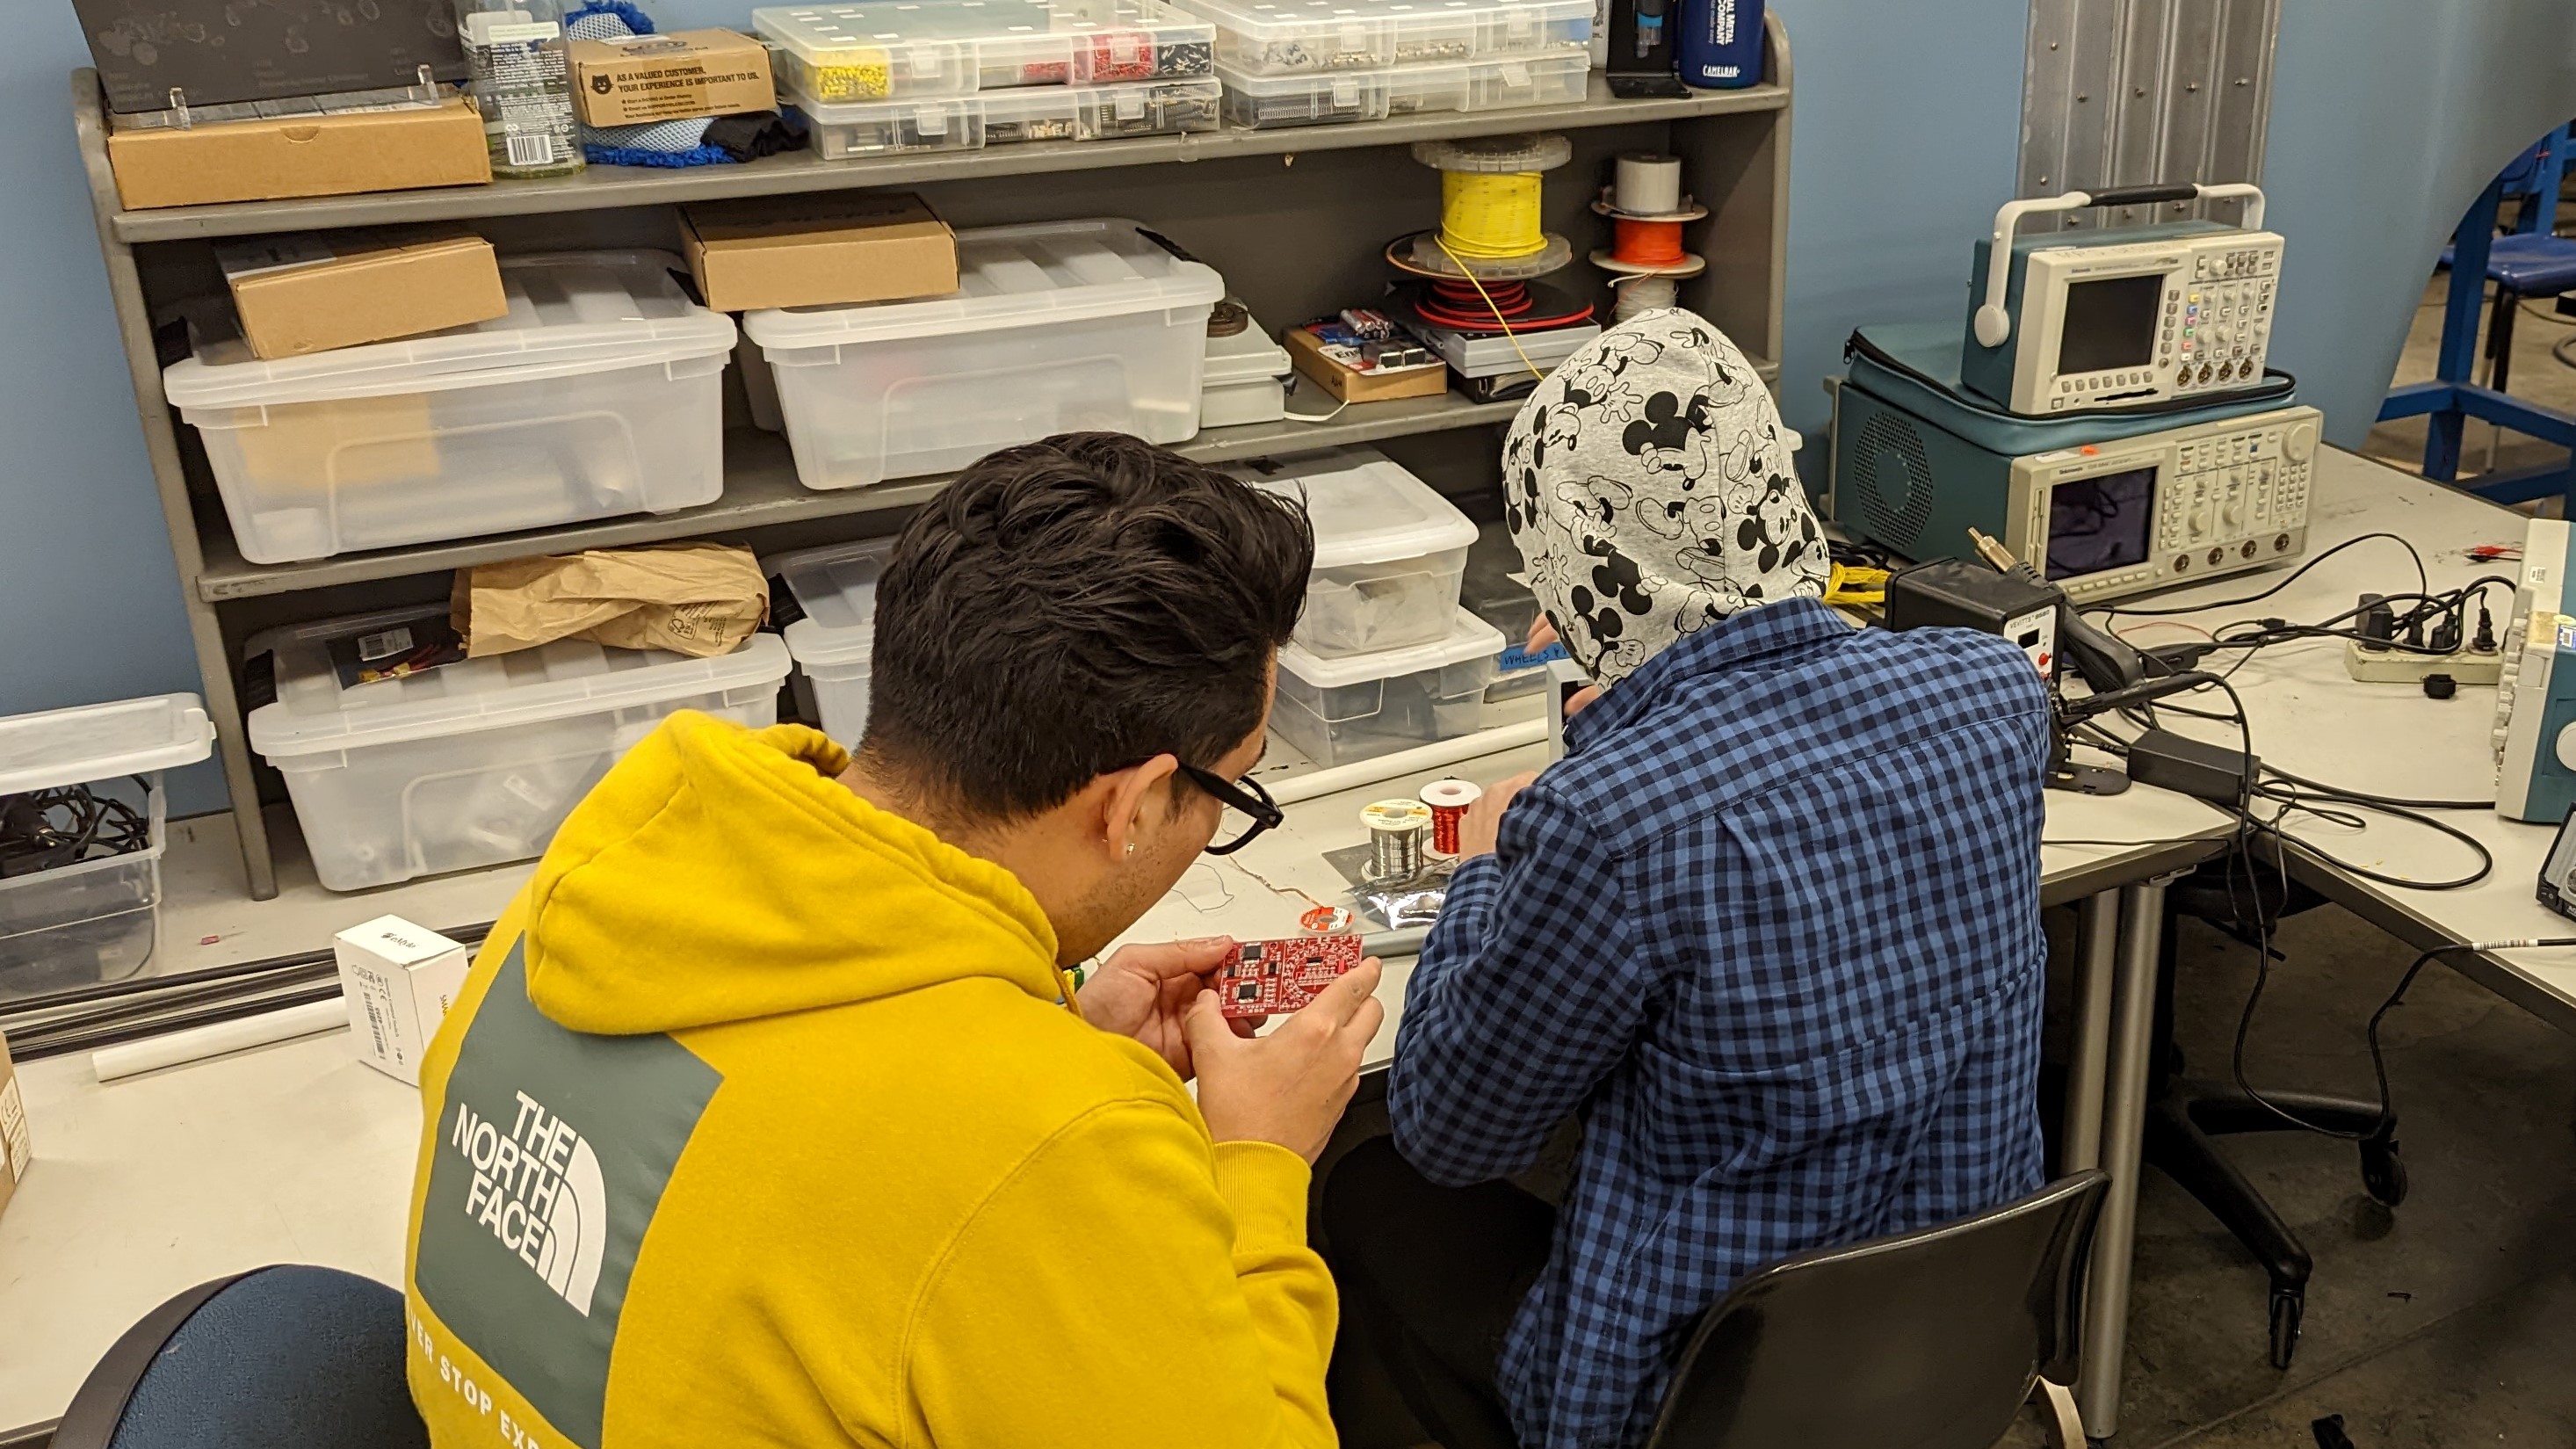 Picture of some of the Electrical members practicing soldering